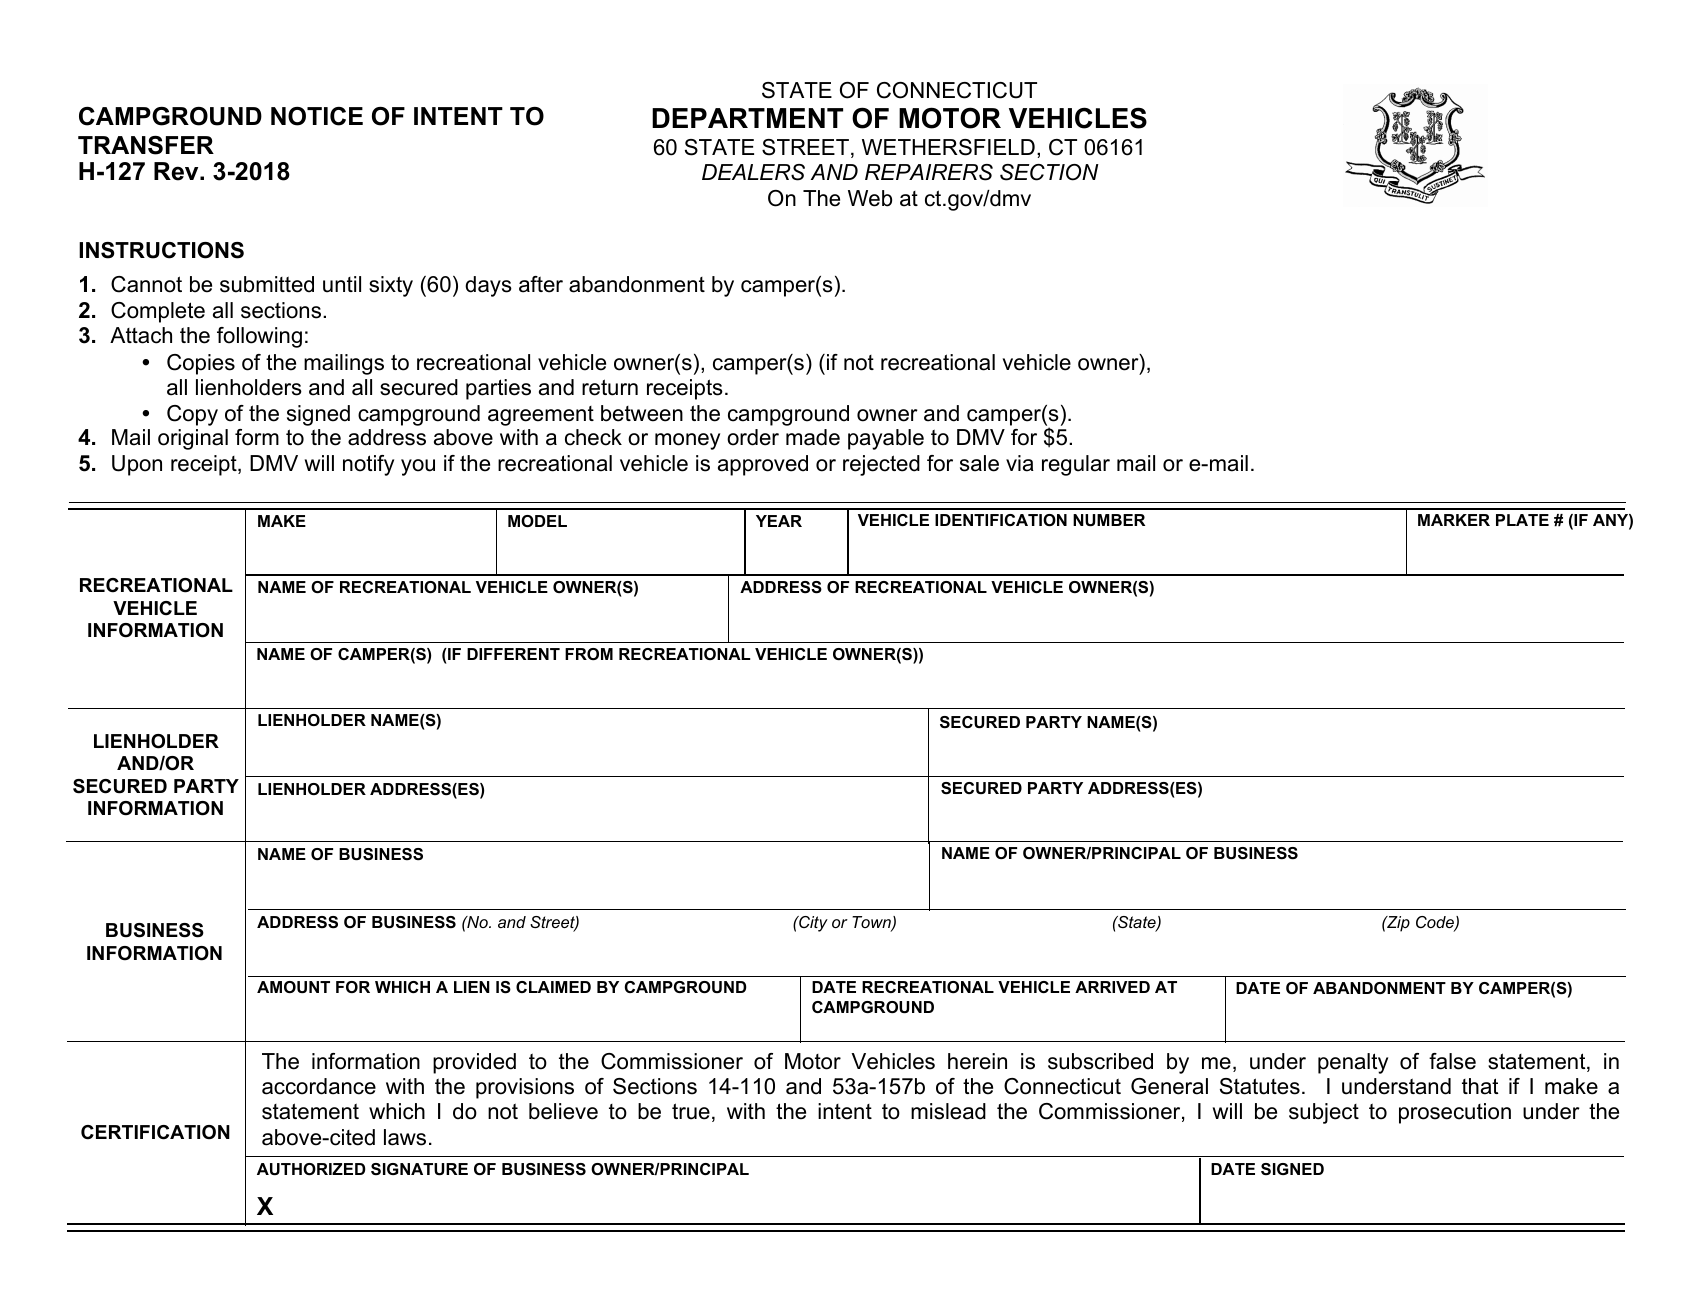 ct-dmv-form-h127-campground-notice-of-intent-to-transfer-forms